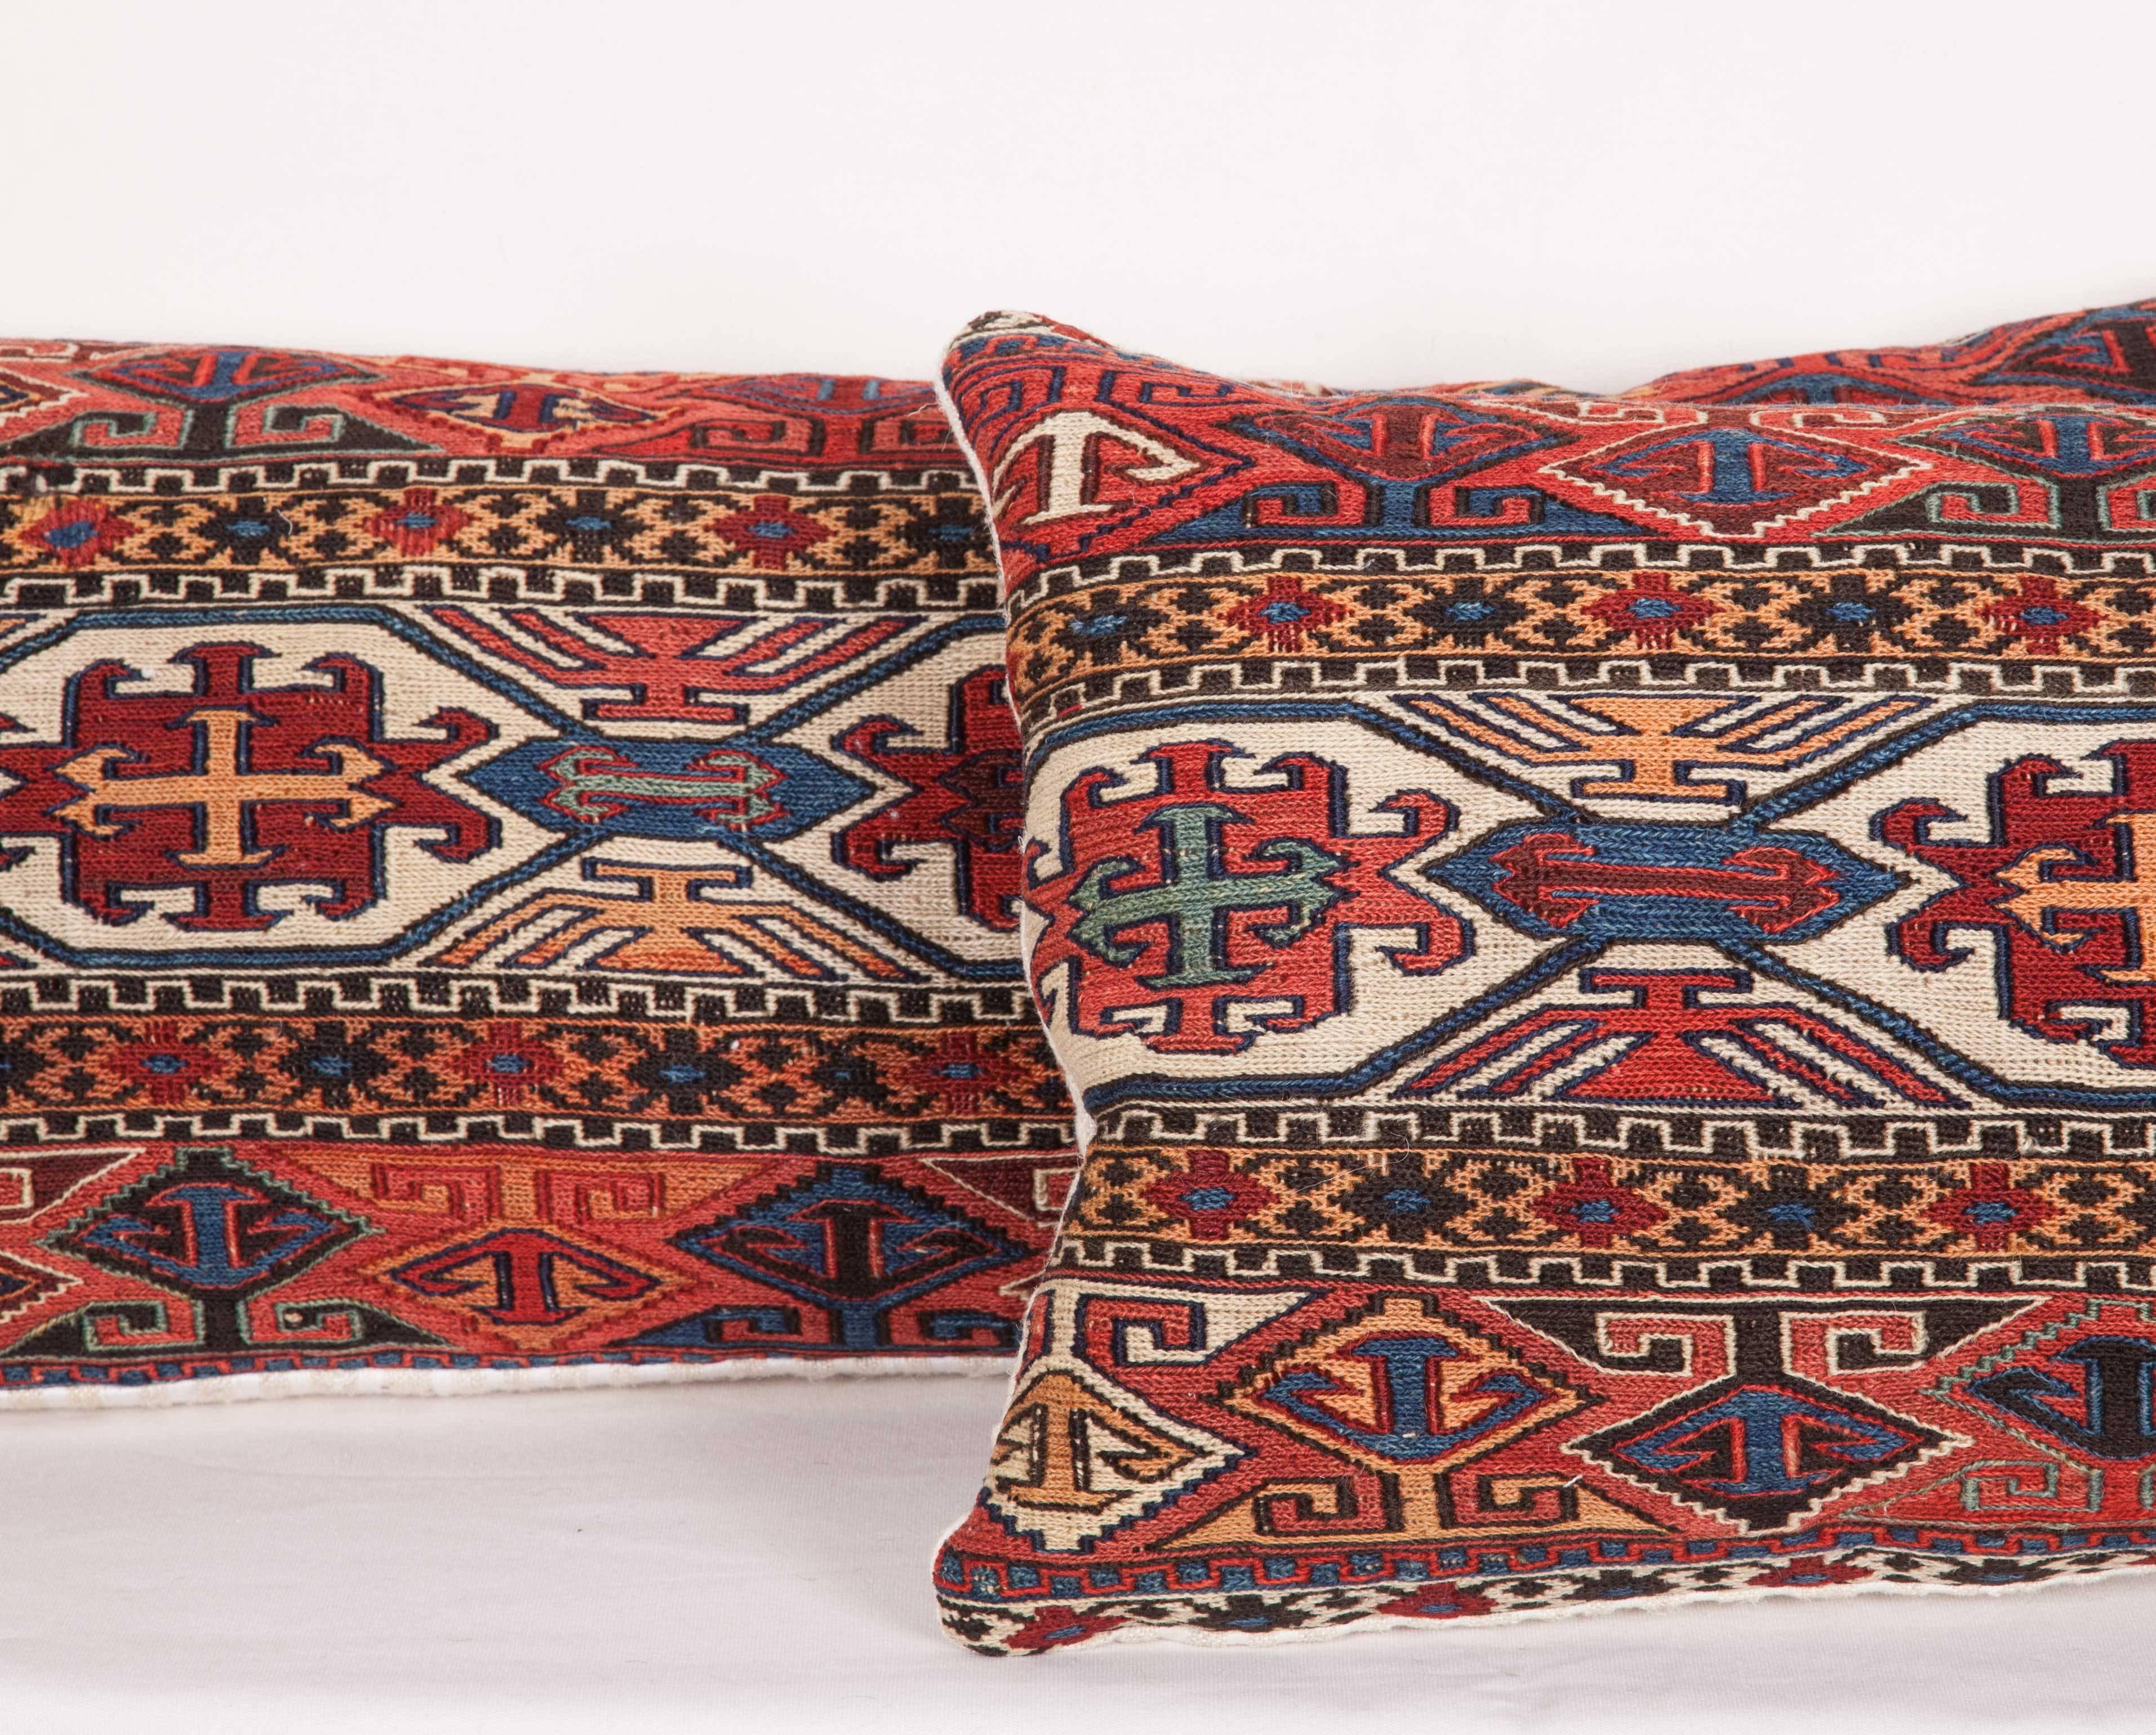 The pillows are made out of a late 19th century, Shasavan Mafrash panels. It does not come with an insert but it comes with a bag made to the size and out of cotton to accommodate the filling. The backing is made of hand woven vintage Anatolian